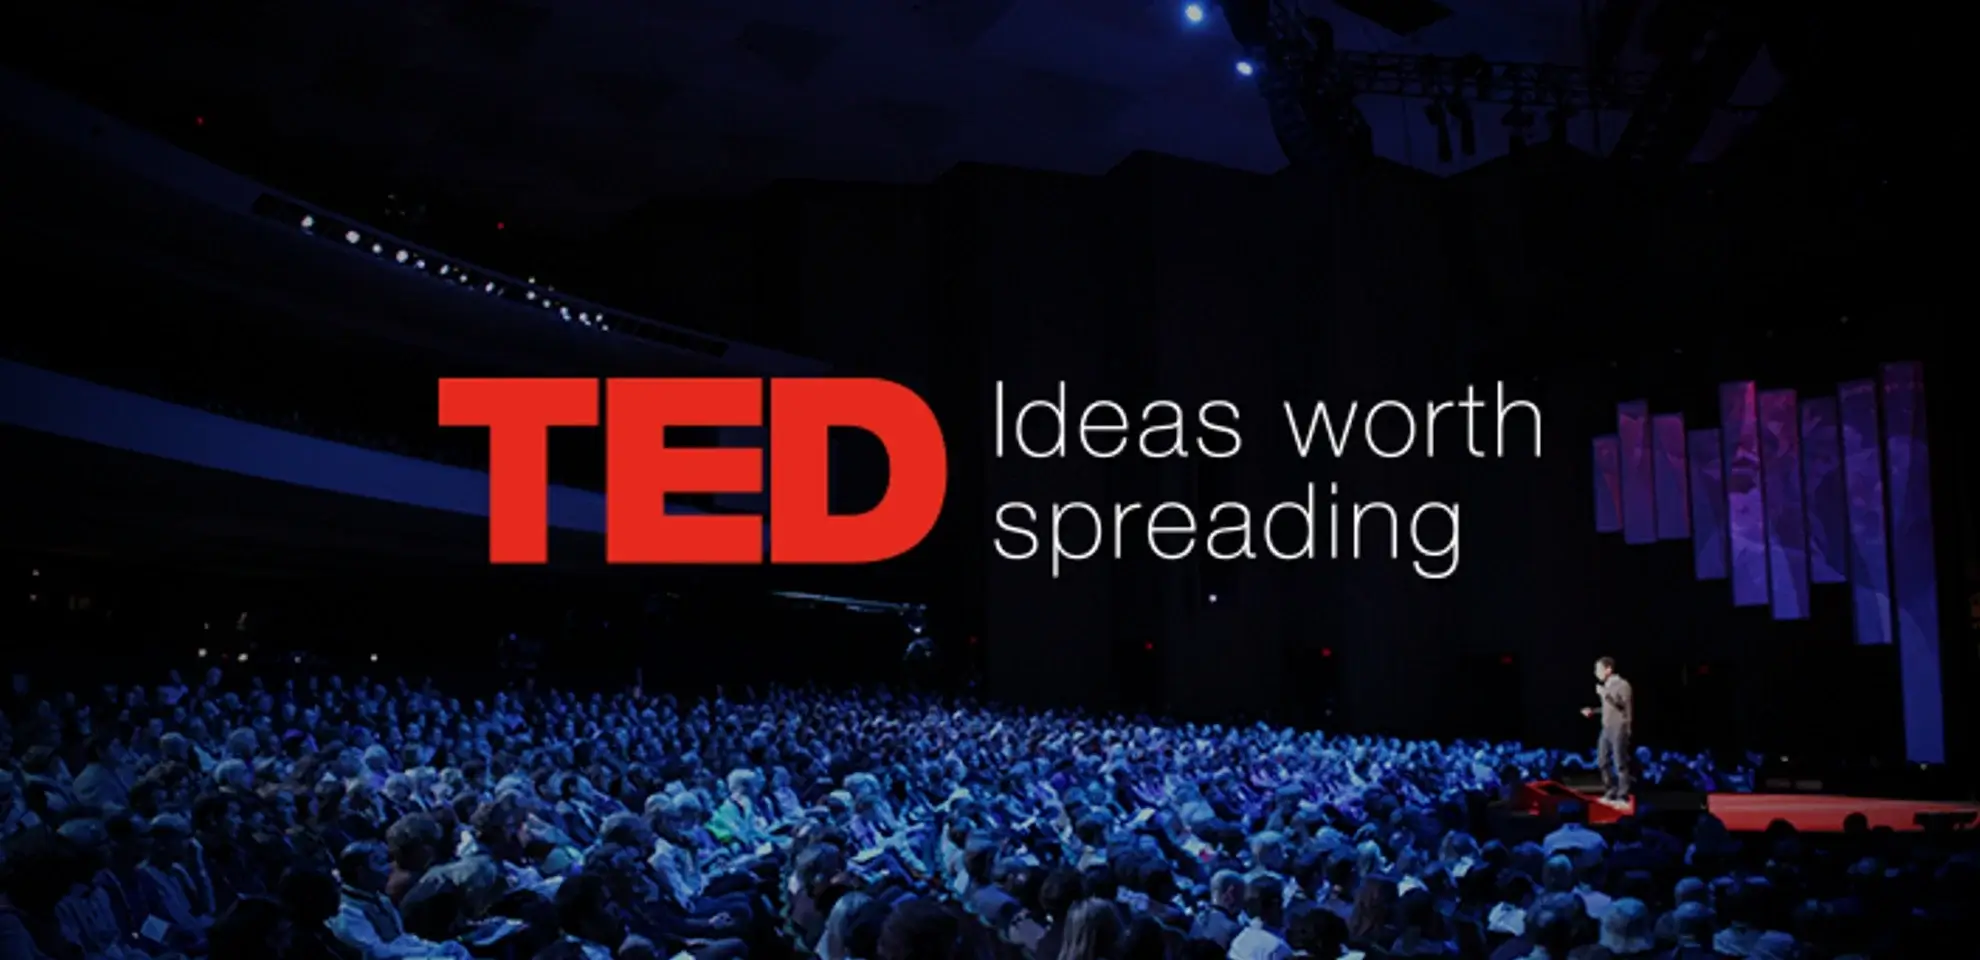 TED speeches